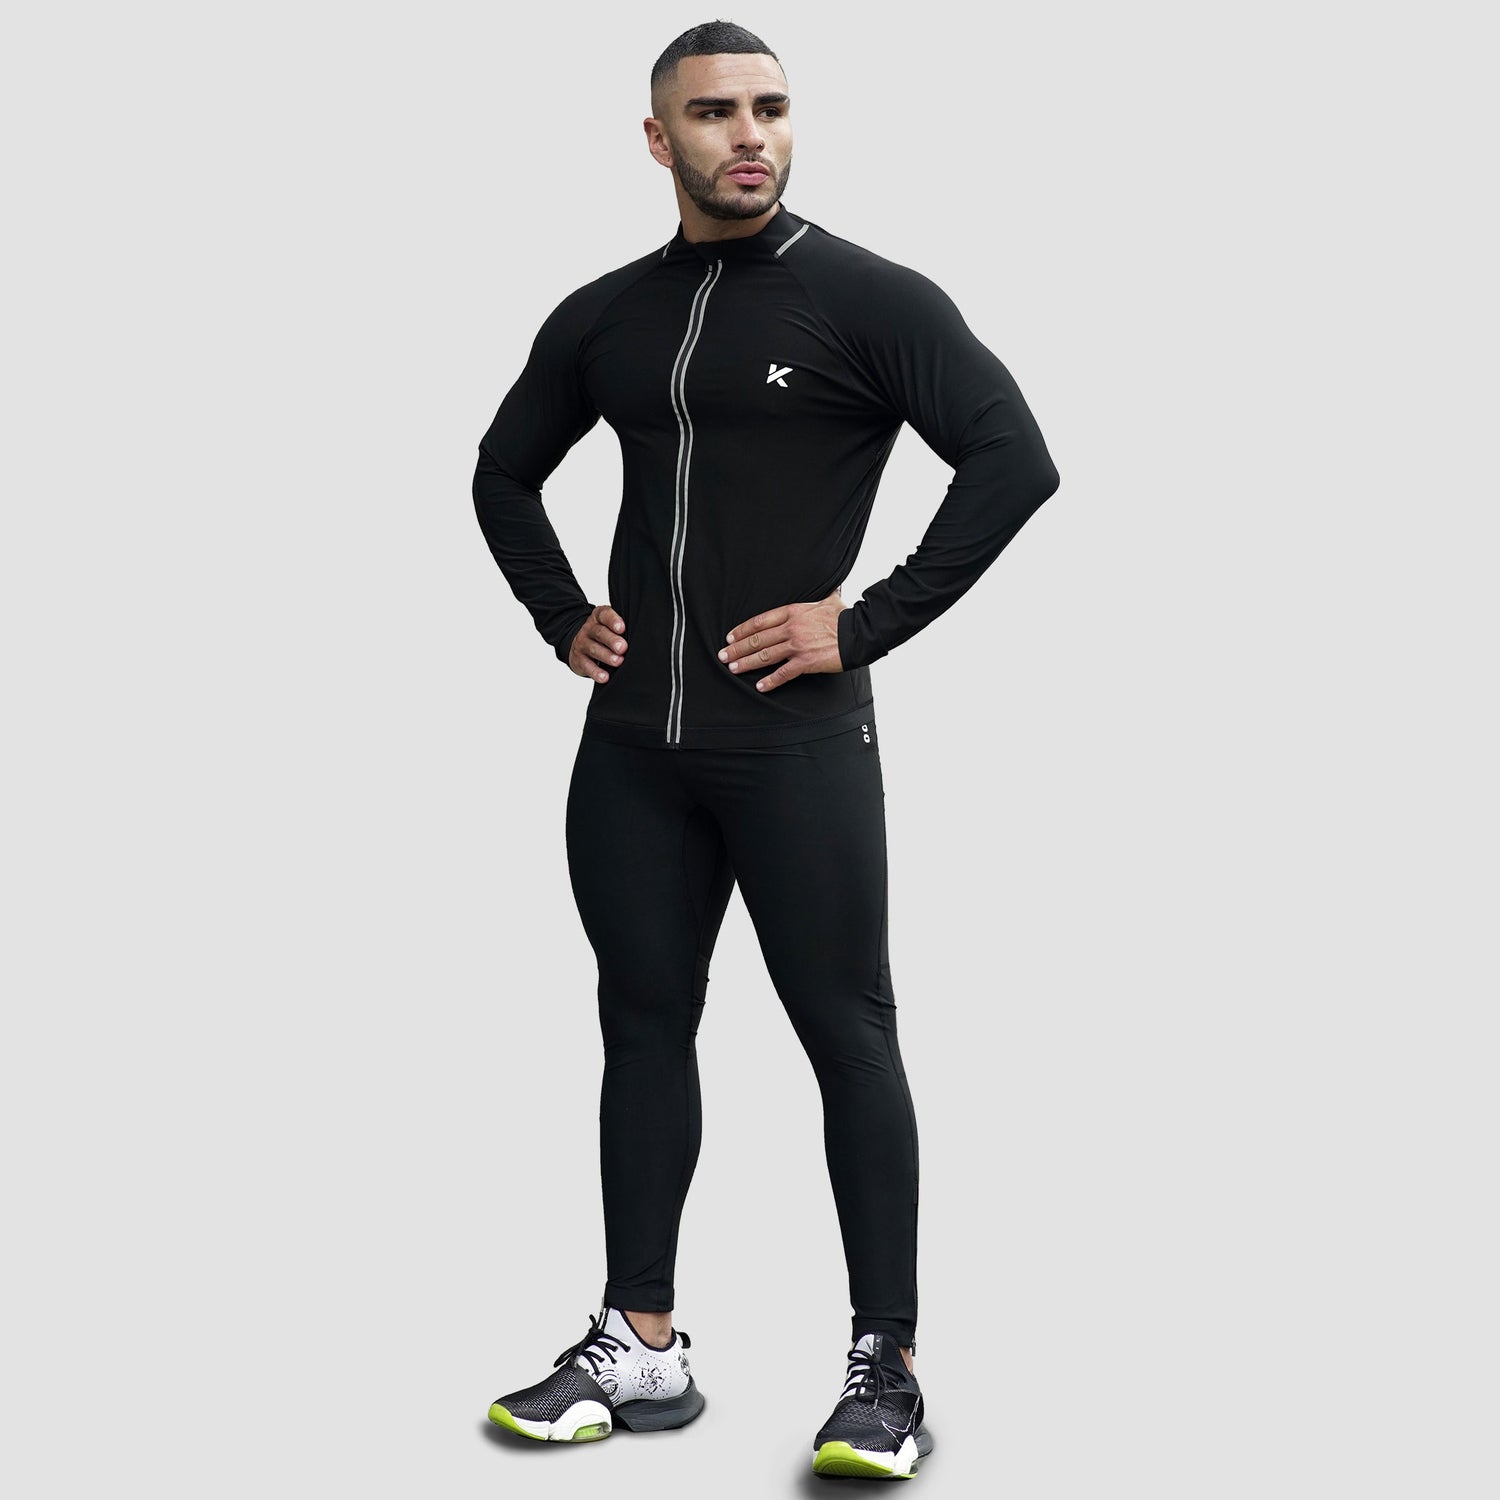 Men's Neoprene Sauna Suit Compression Tights V3, Weight Loss